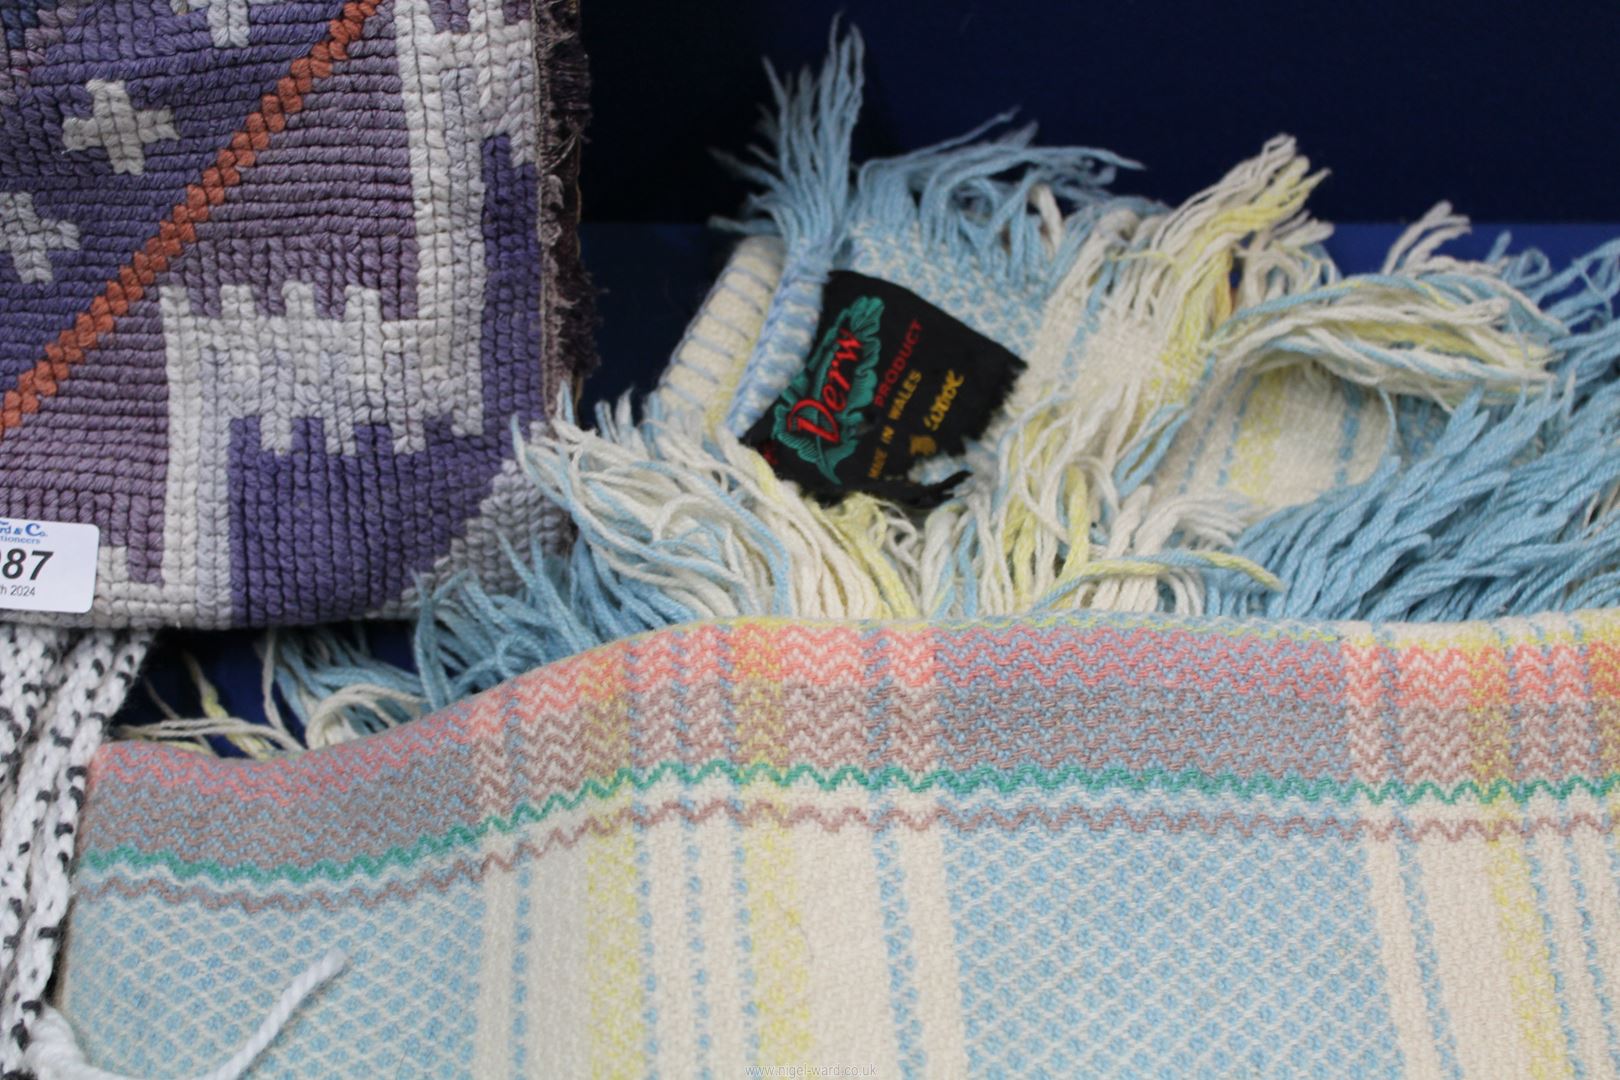 A 'Derw' Welsh Wool blanket in cream, blue and pink, a black and white diamond pattern throw, - Image 3 of 3